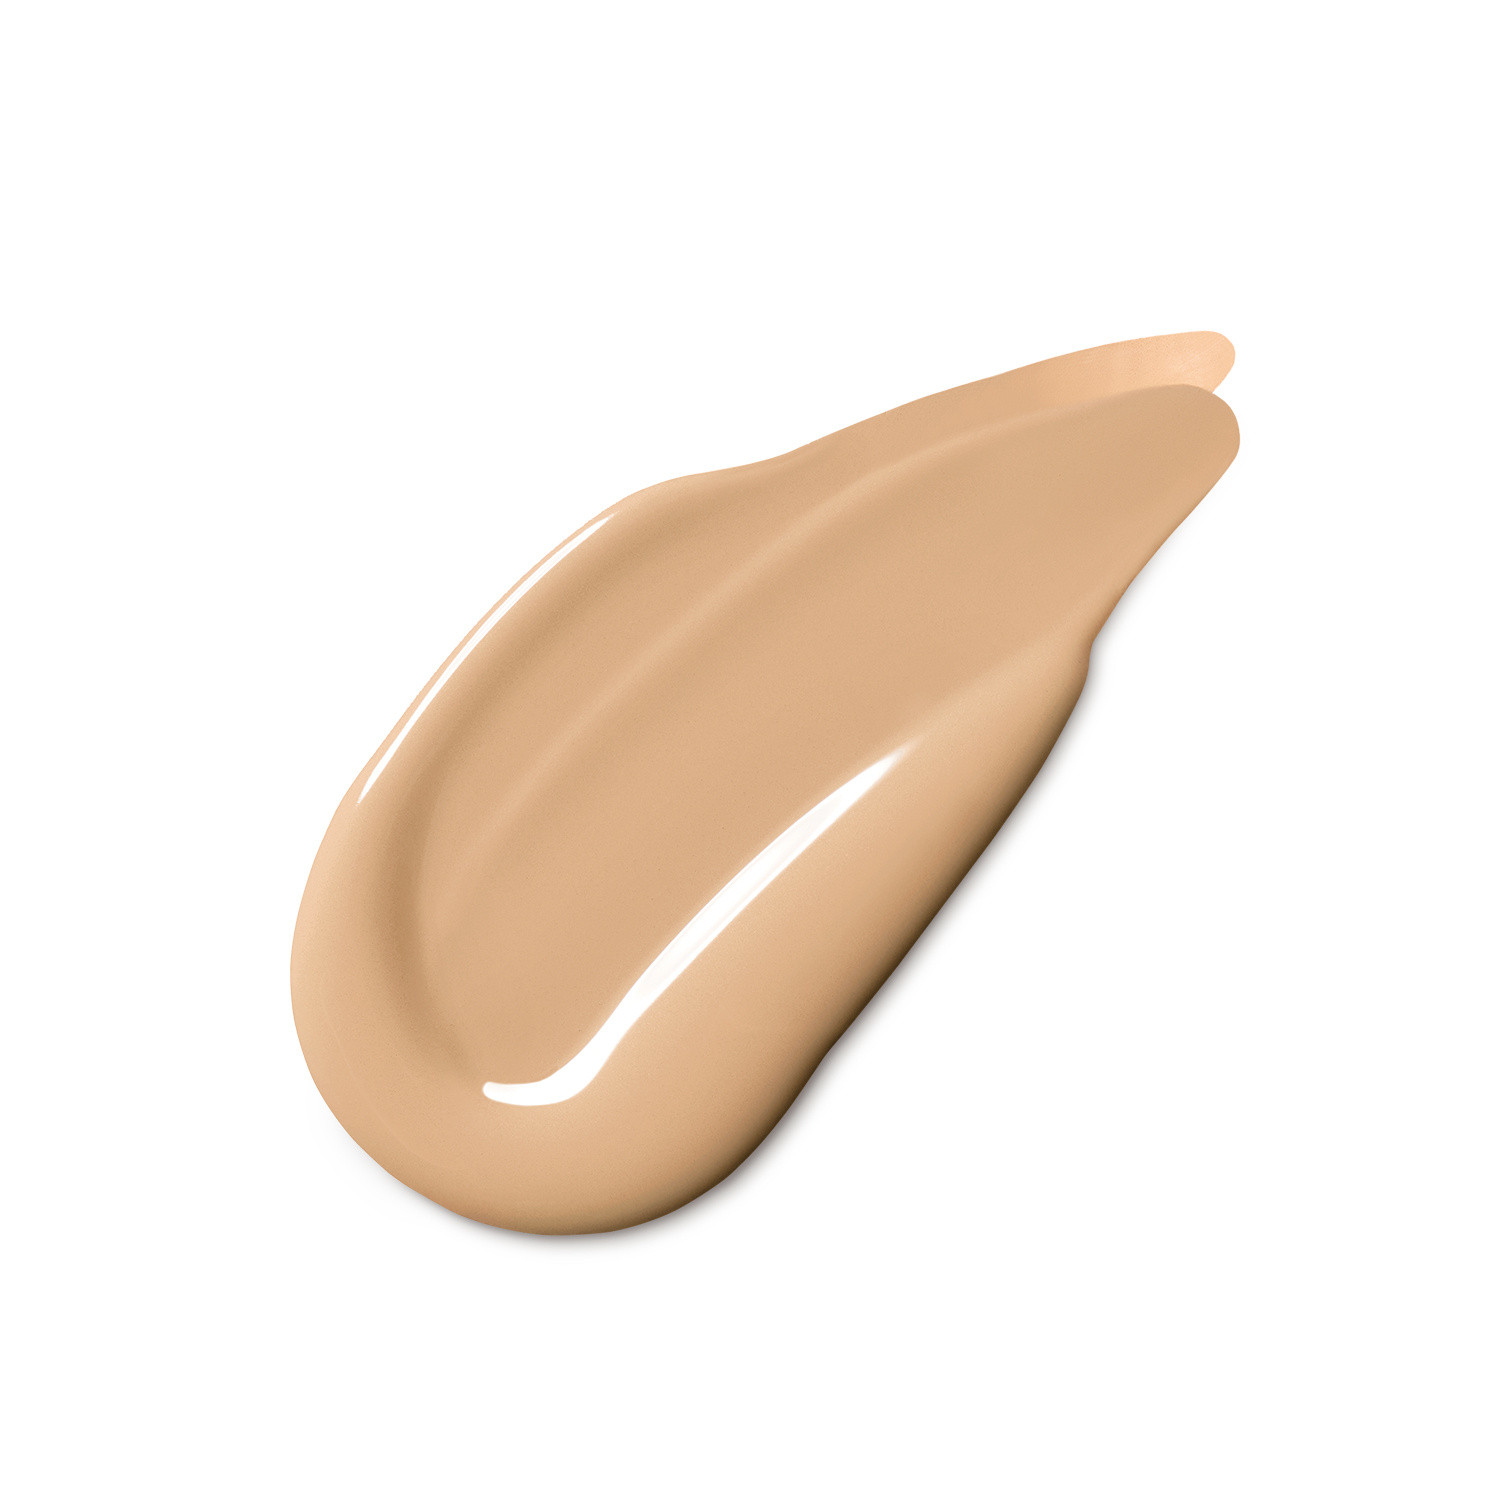 CLINIQUE EVEN BETTER CLINICAL™ SERUM FOUNDATION BROAD SPECTRUM   SPF 25 - CN 52 NEUTRAL 30 ML, CN 52 NEUTRAL, large image number 1